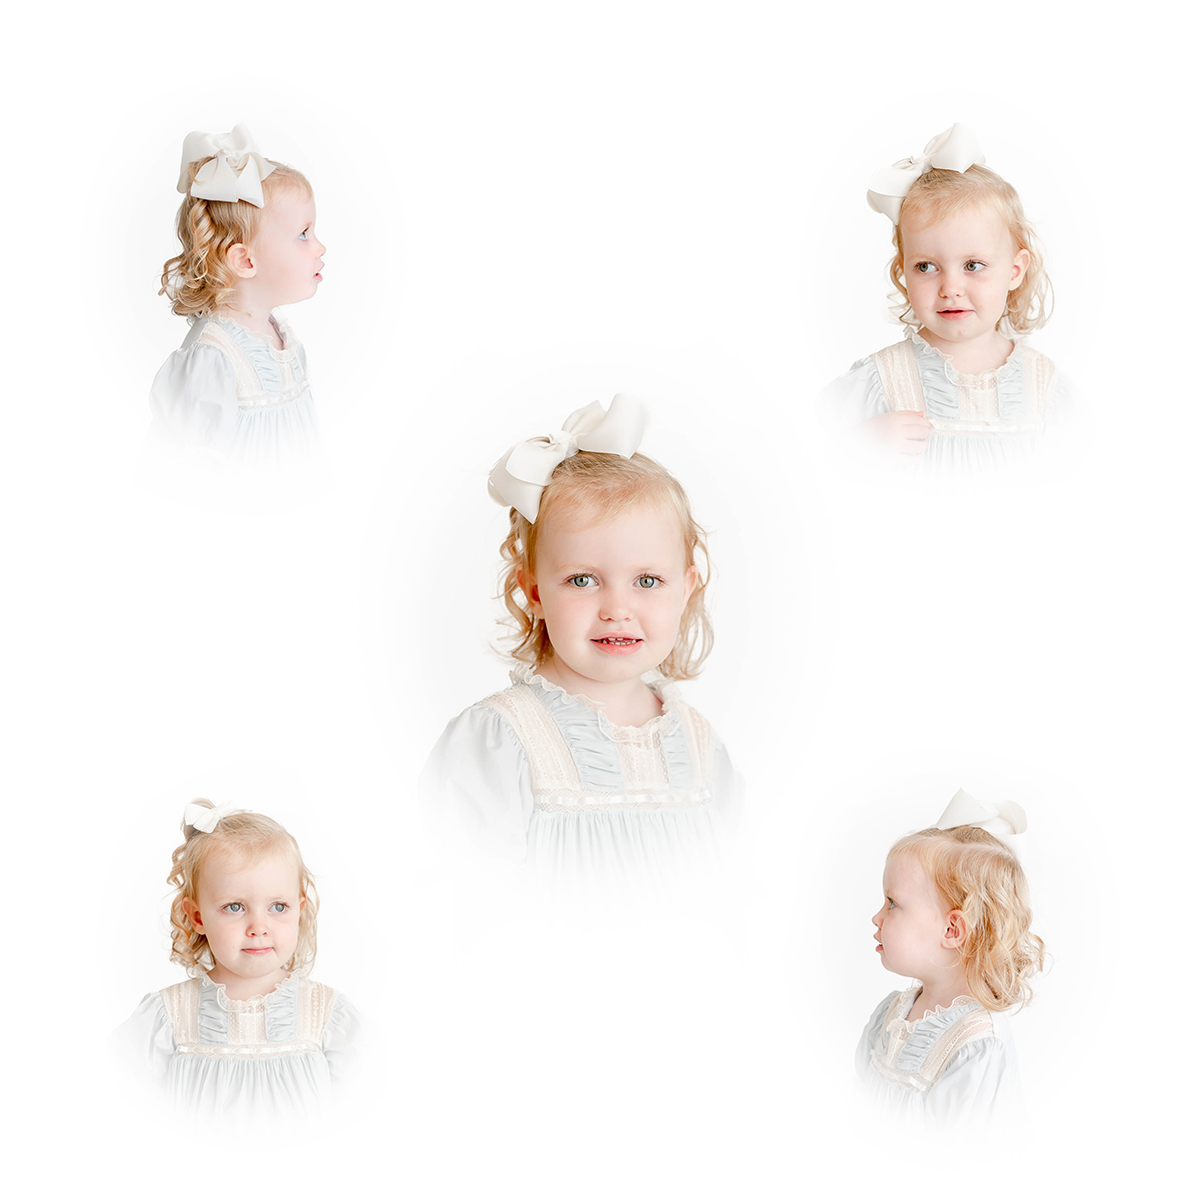 How to take heirloom portraits for professional photographers